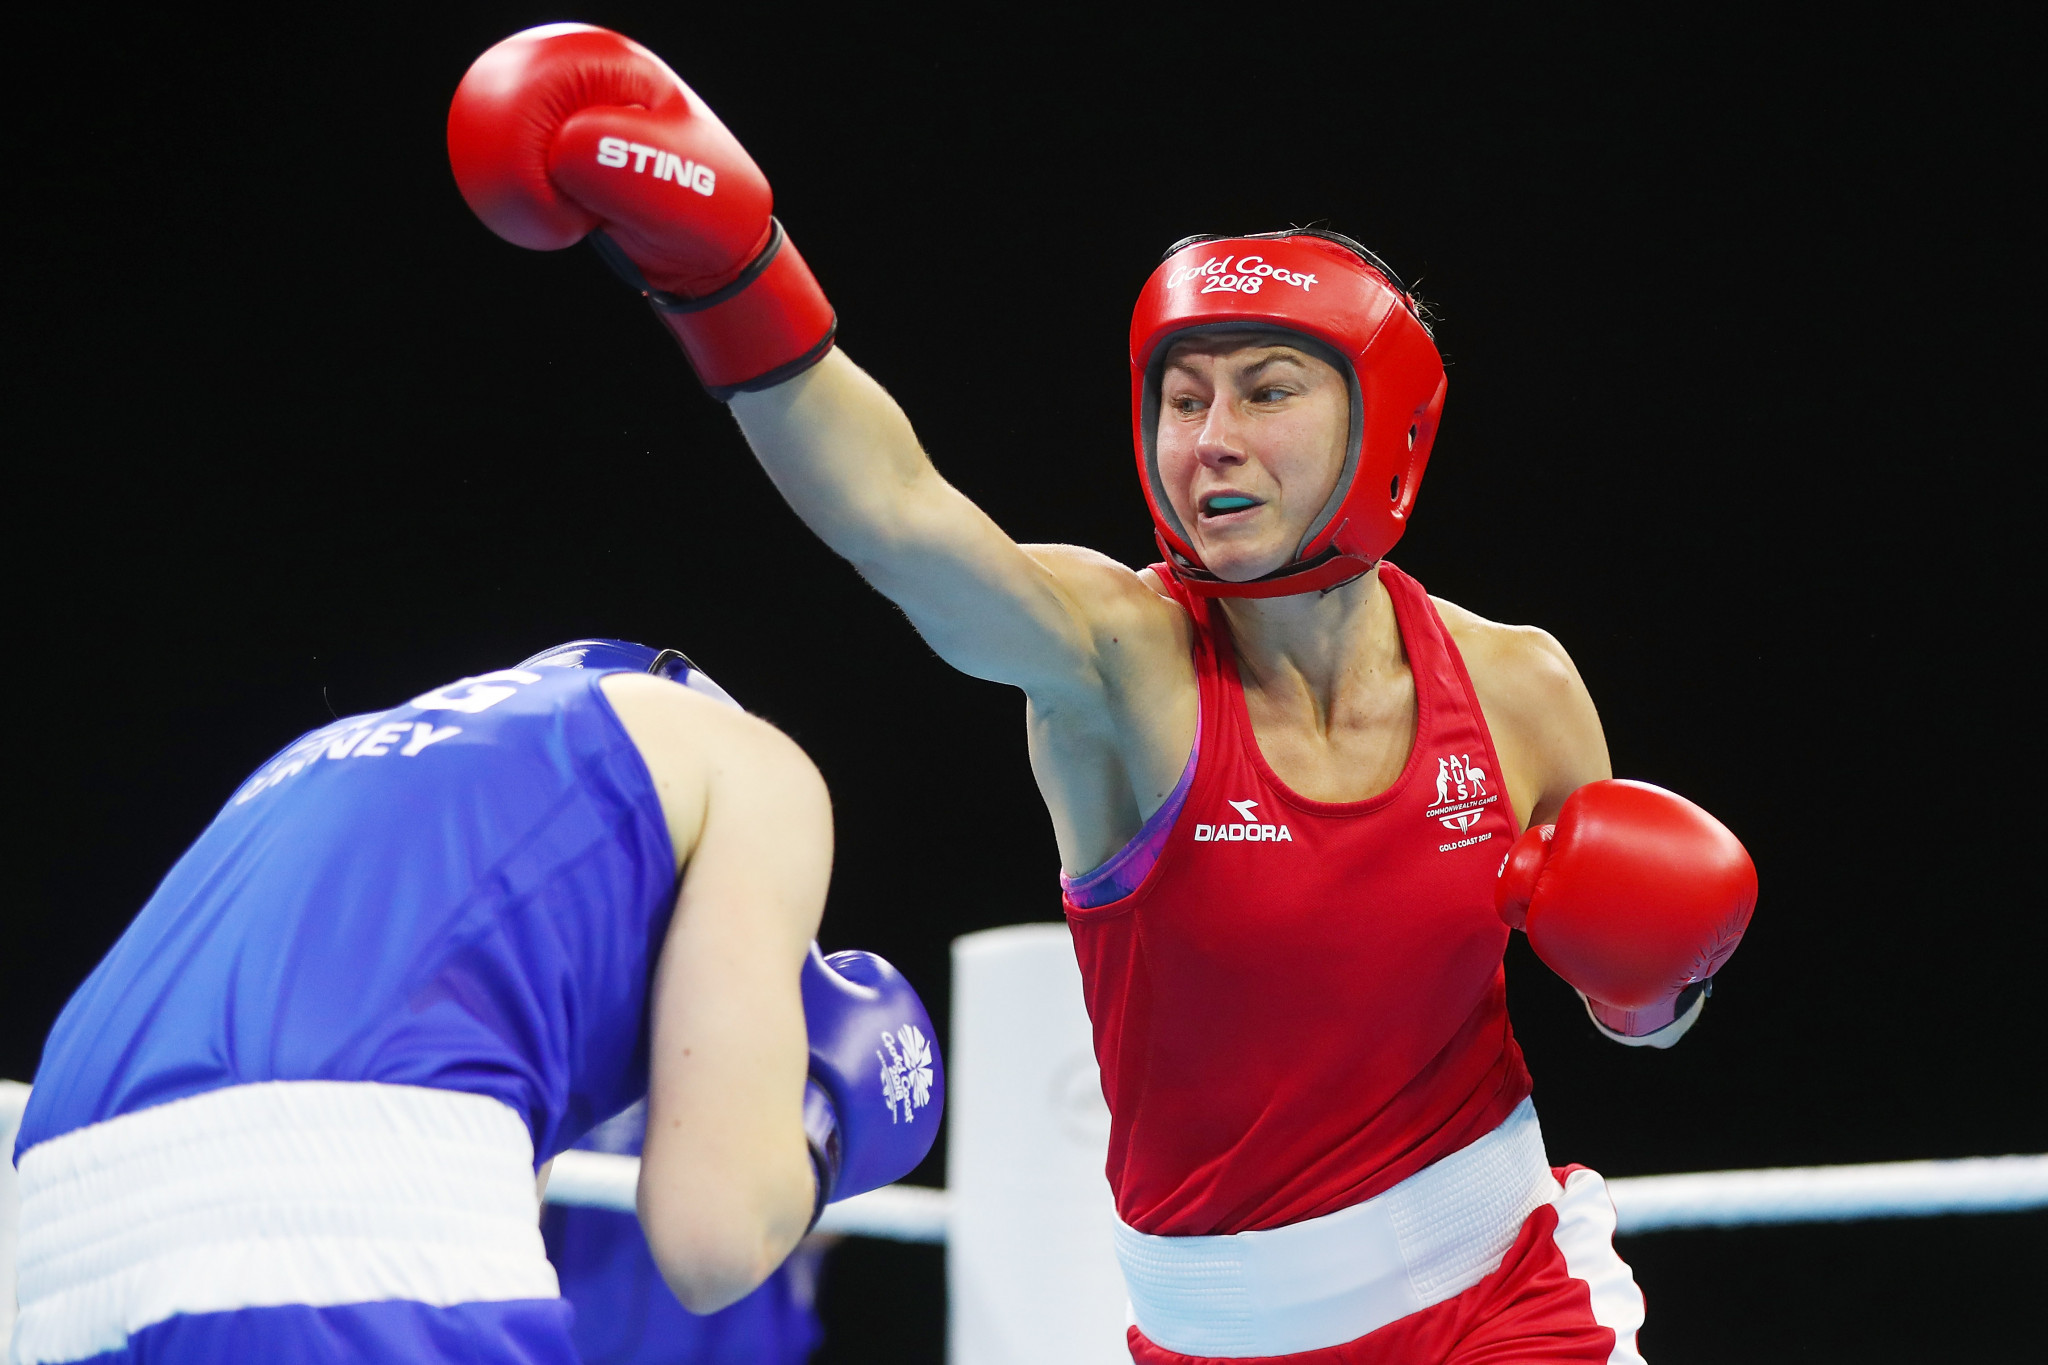 Australia's Commonwealth lightweight champion Anja Stridsman won her first bout of the World Championships ©Getty Images